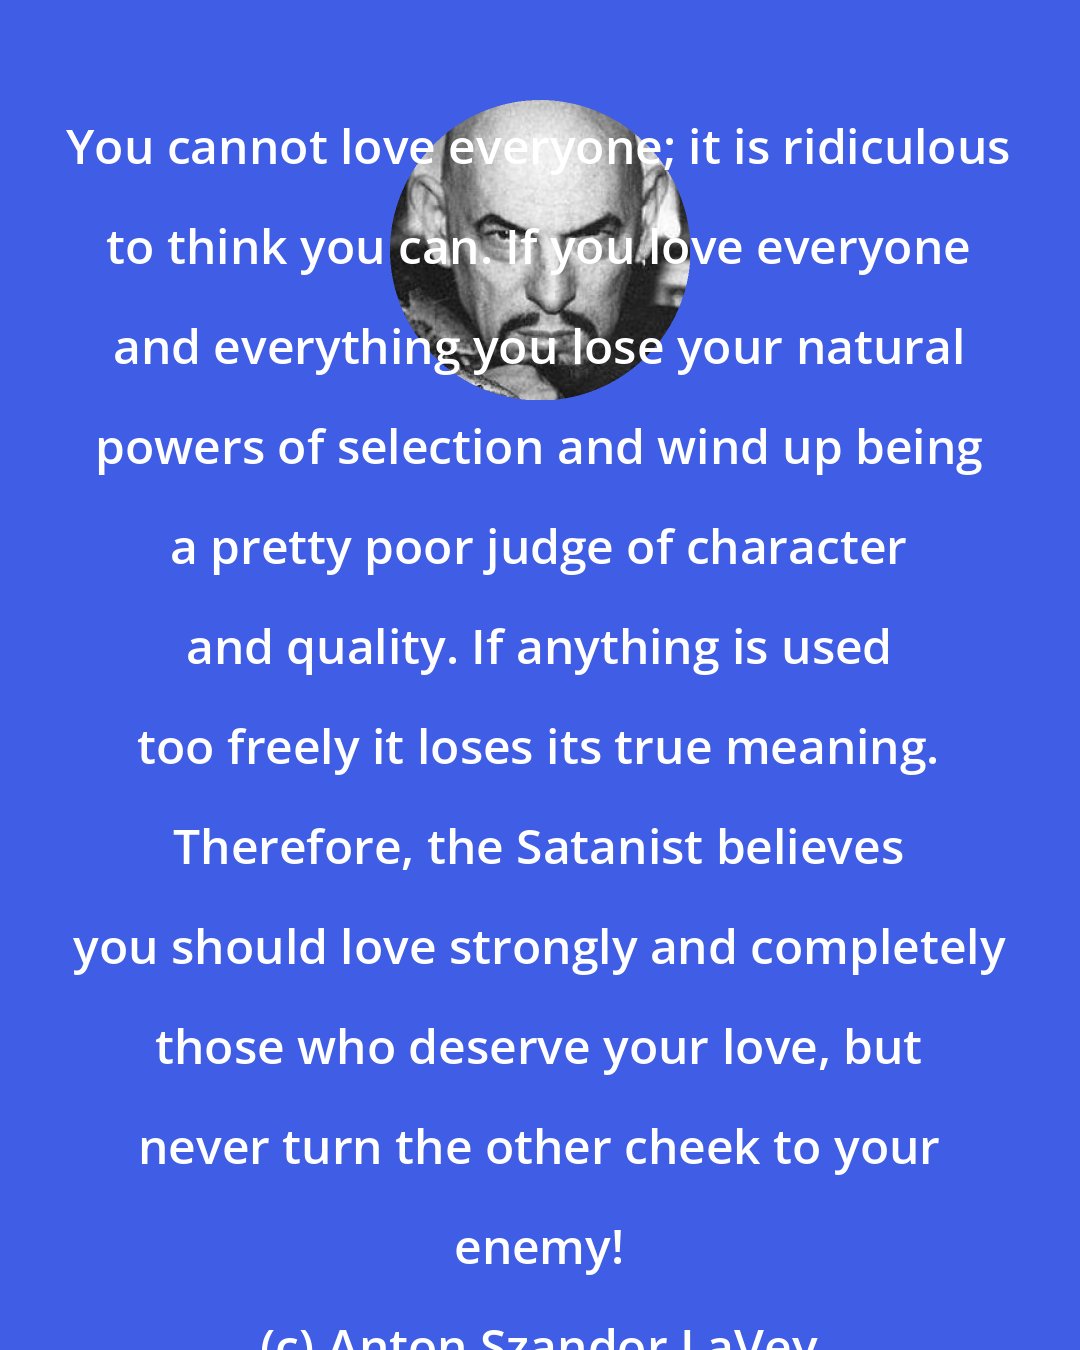 Anton Szandor LaVey: You cannot love everyone; it is ridiculous to think you can. If you love everyone and everything you lose your natural powers of selection and wind up being a pretty poor judge of character and quality. If anything is used too freely it loses its true meaning. Therefore, the Satanist believes you should love strongly and completely those who deserve your love, but never turn the other cheek to your enemy!